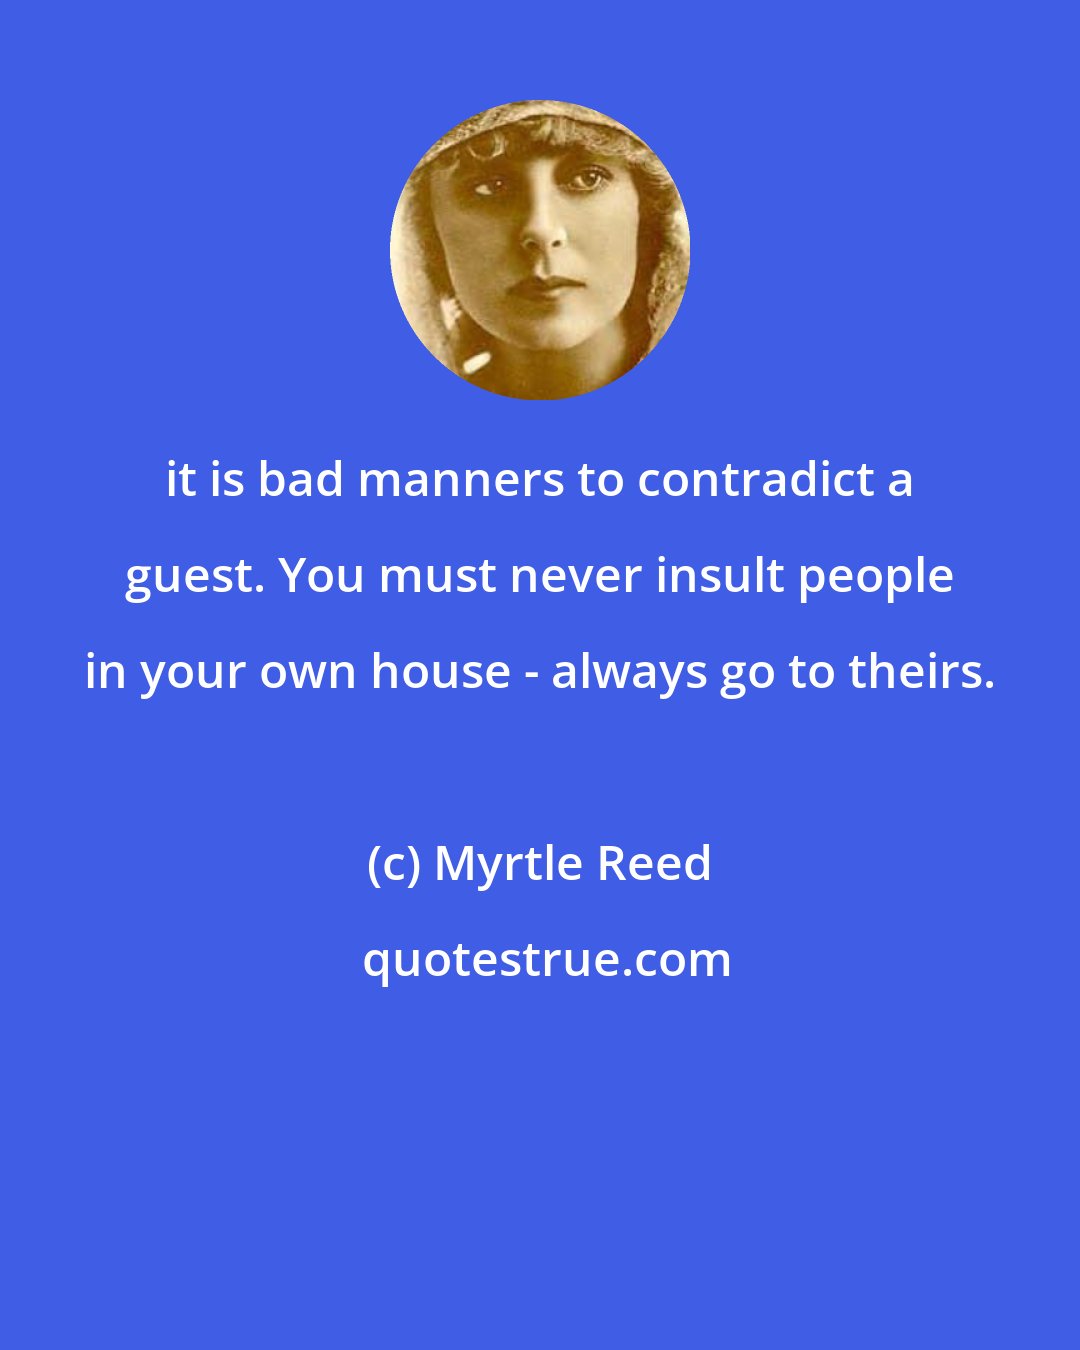 Myrtle Reed: it is bad manners to contradict a guest. You must never insult people in your own house - always go to theirs.